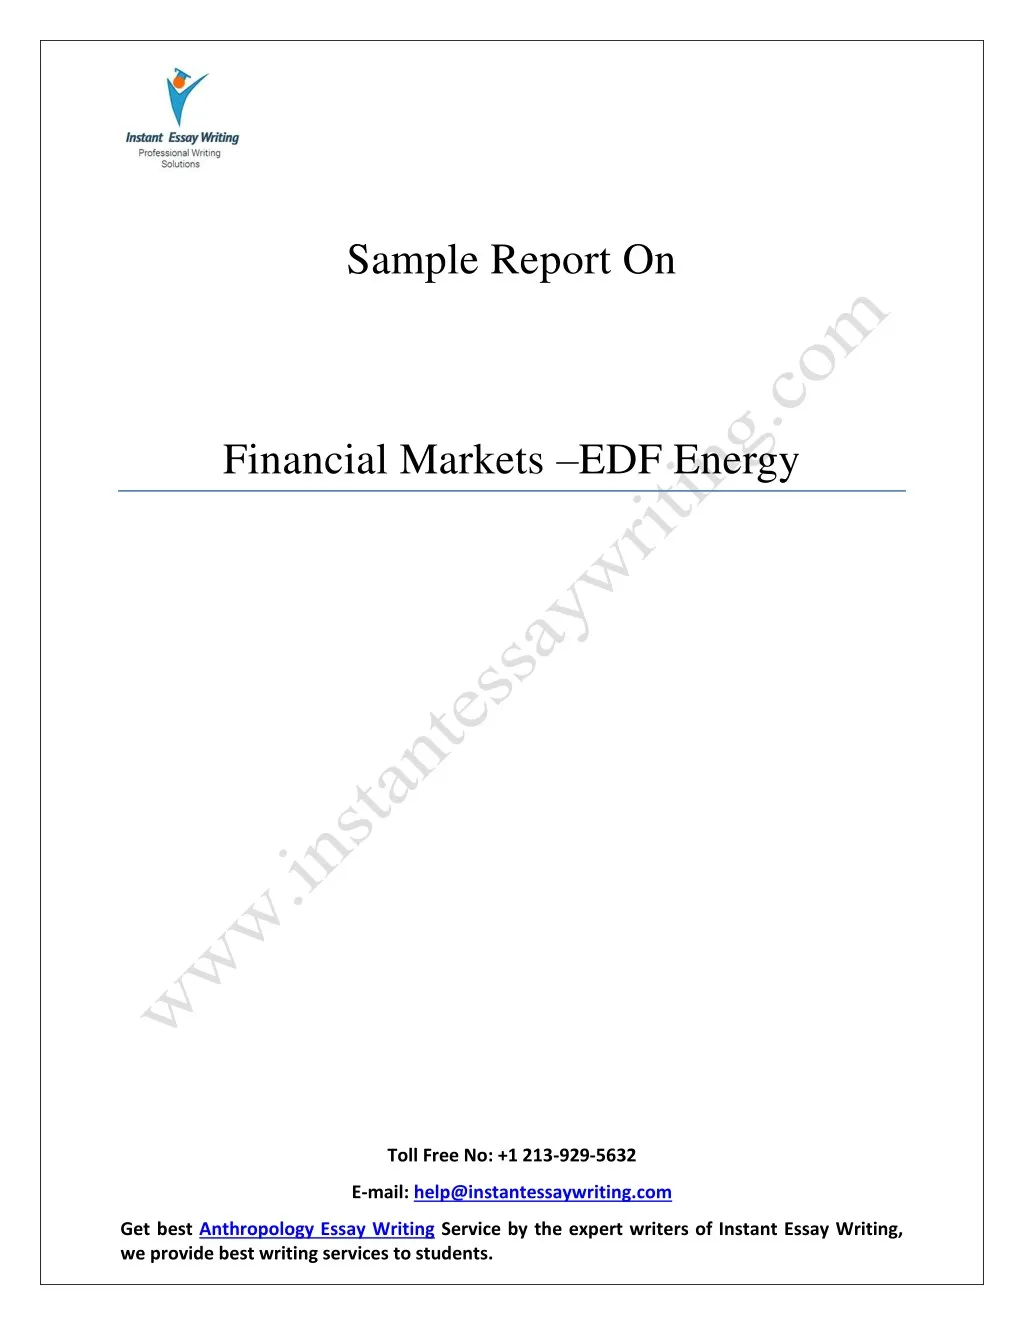 sample report on financial markets edf energy